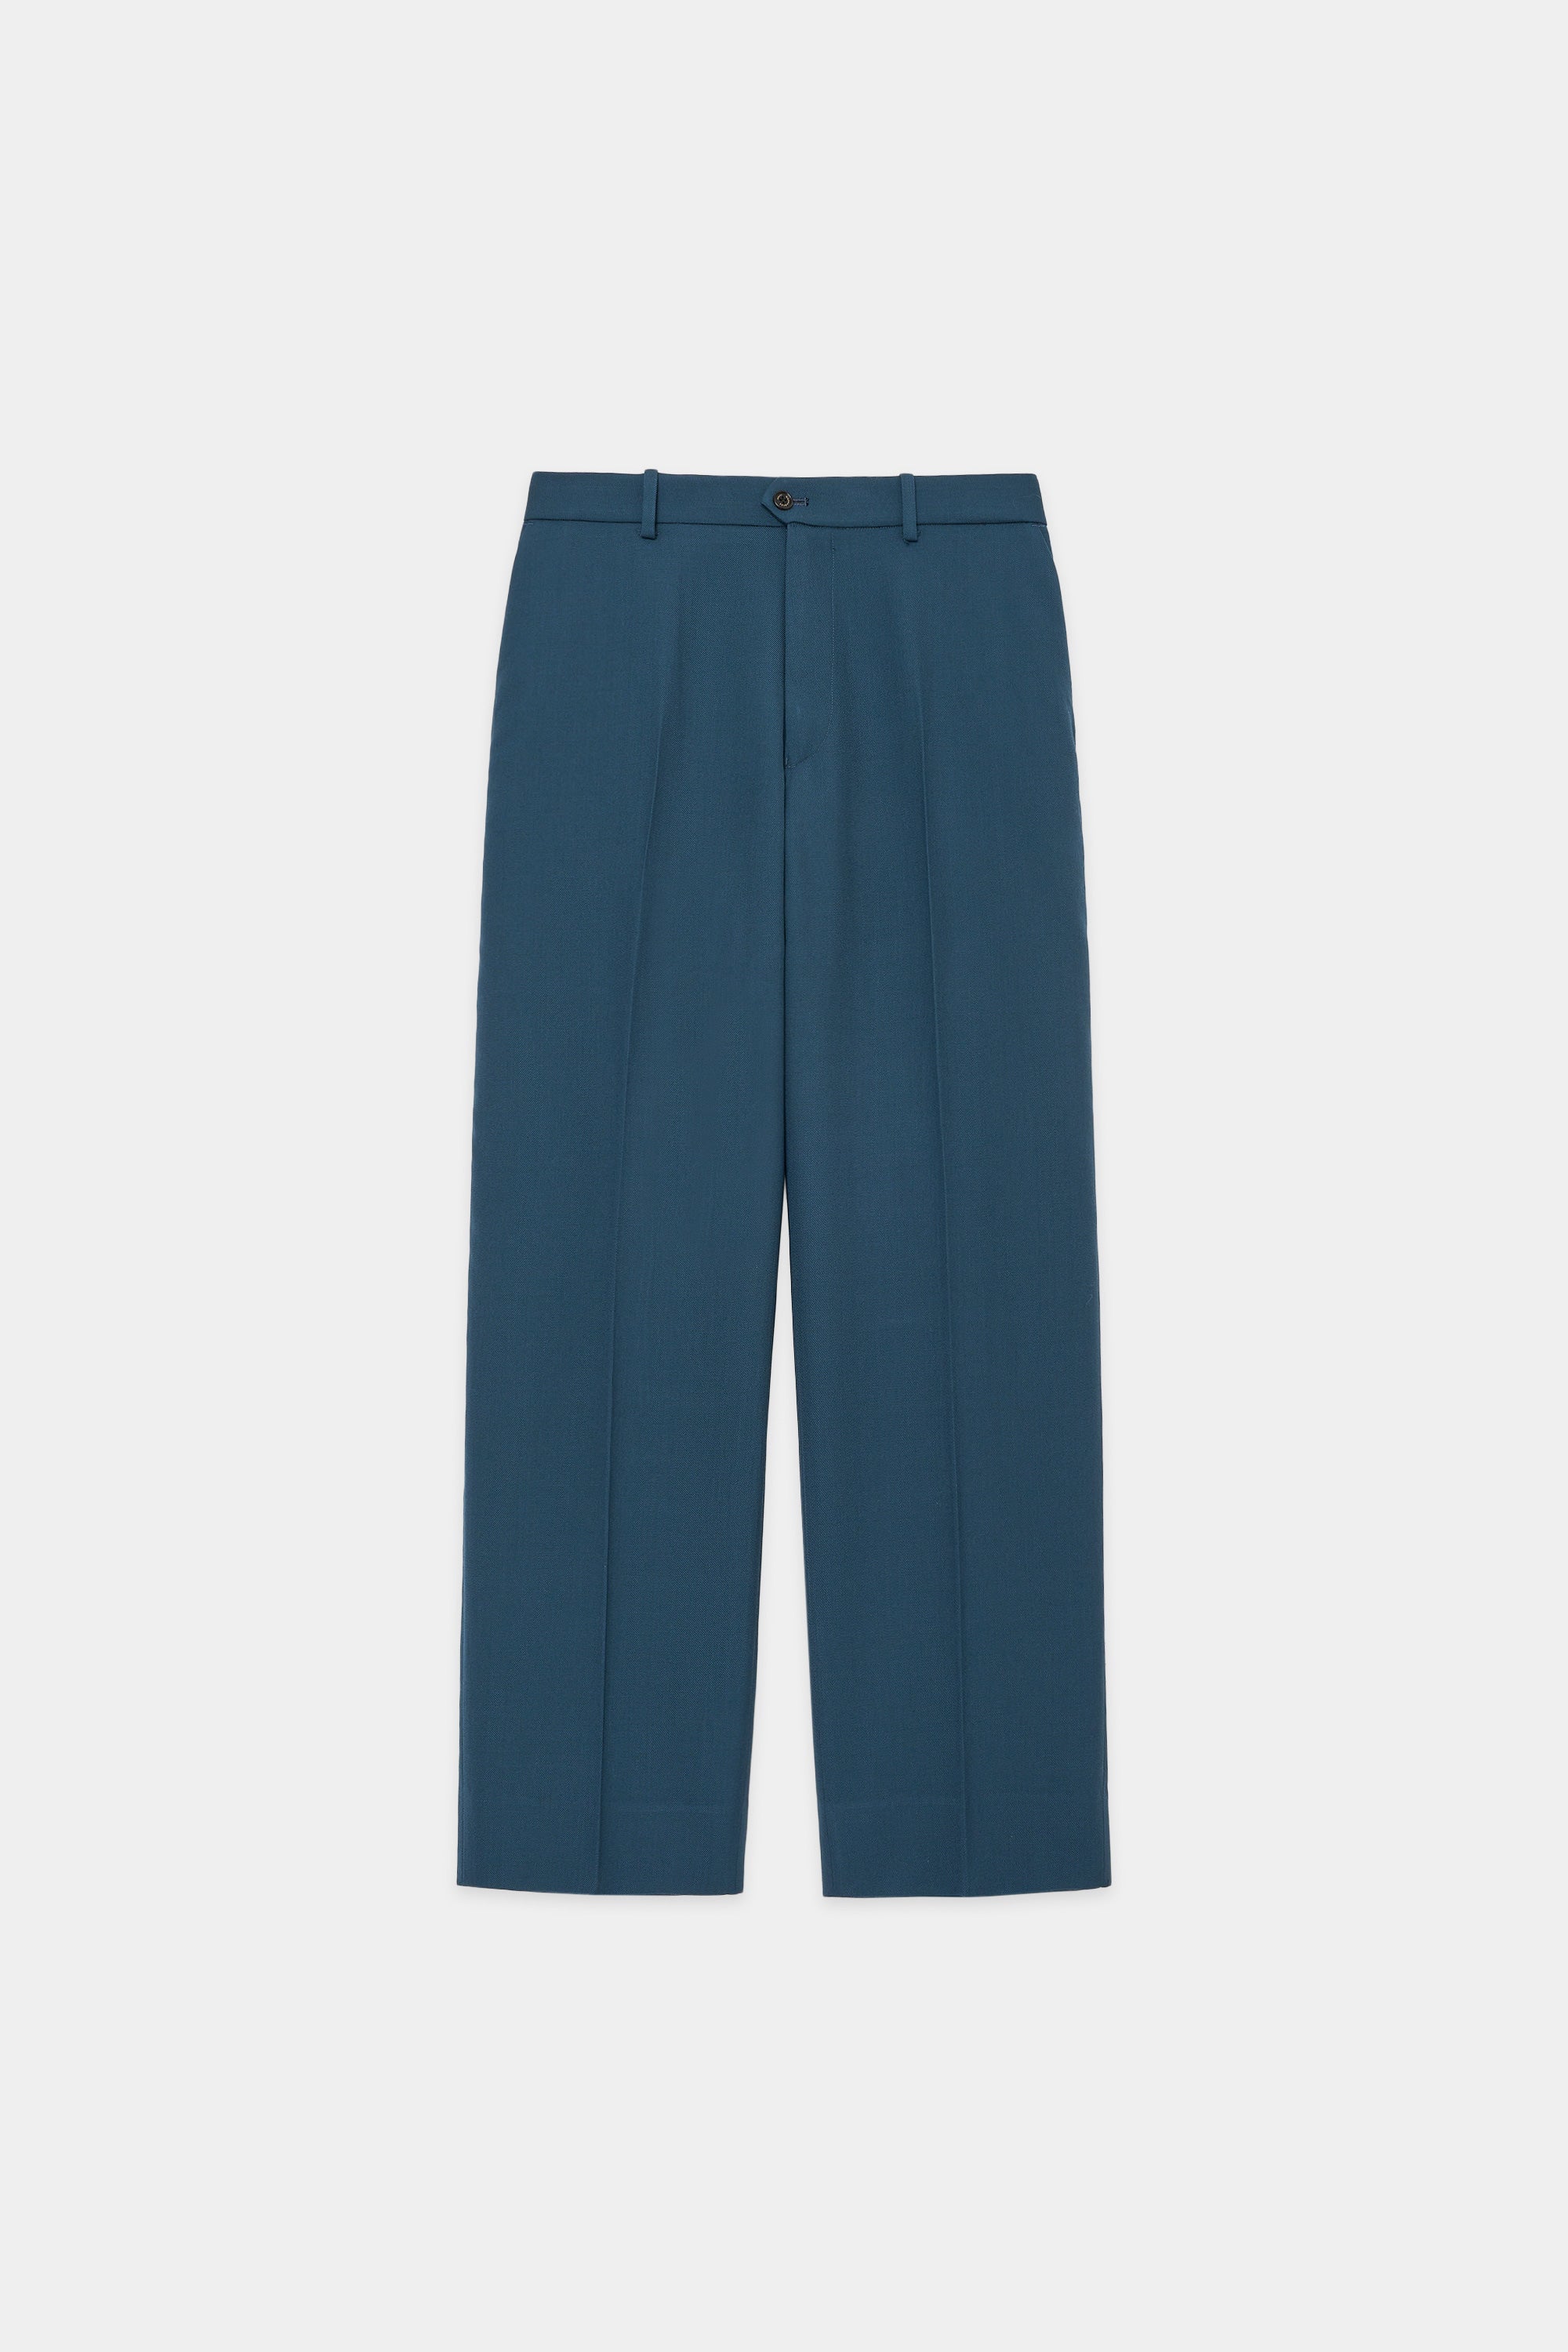 ORGANIC WOOL SURVIVAL CLOTH FLAT FRONT TROUSERS, Dark Turquoise